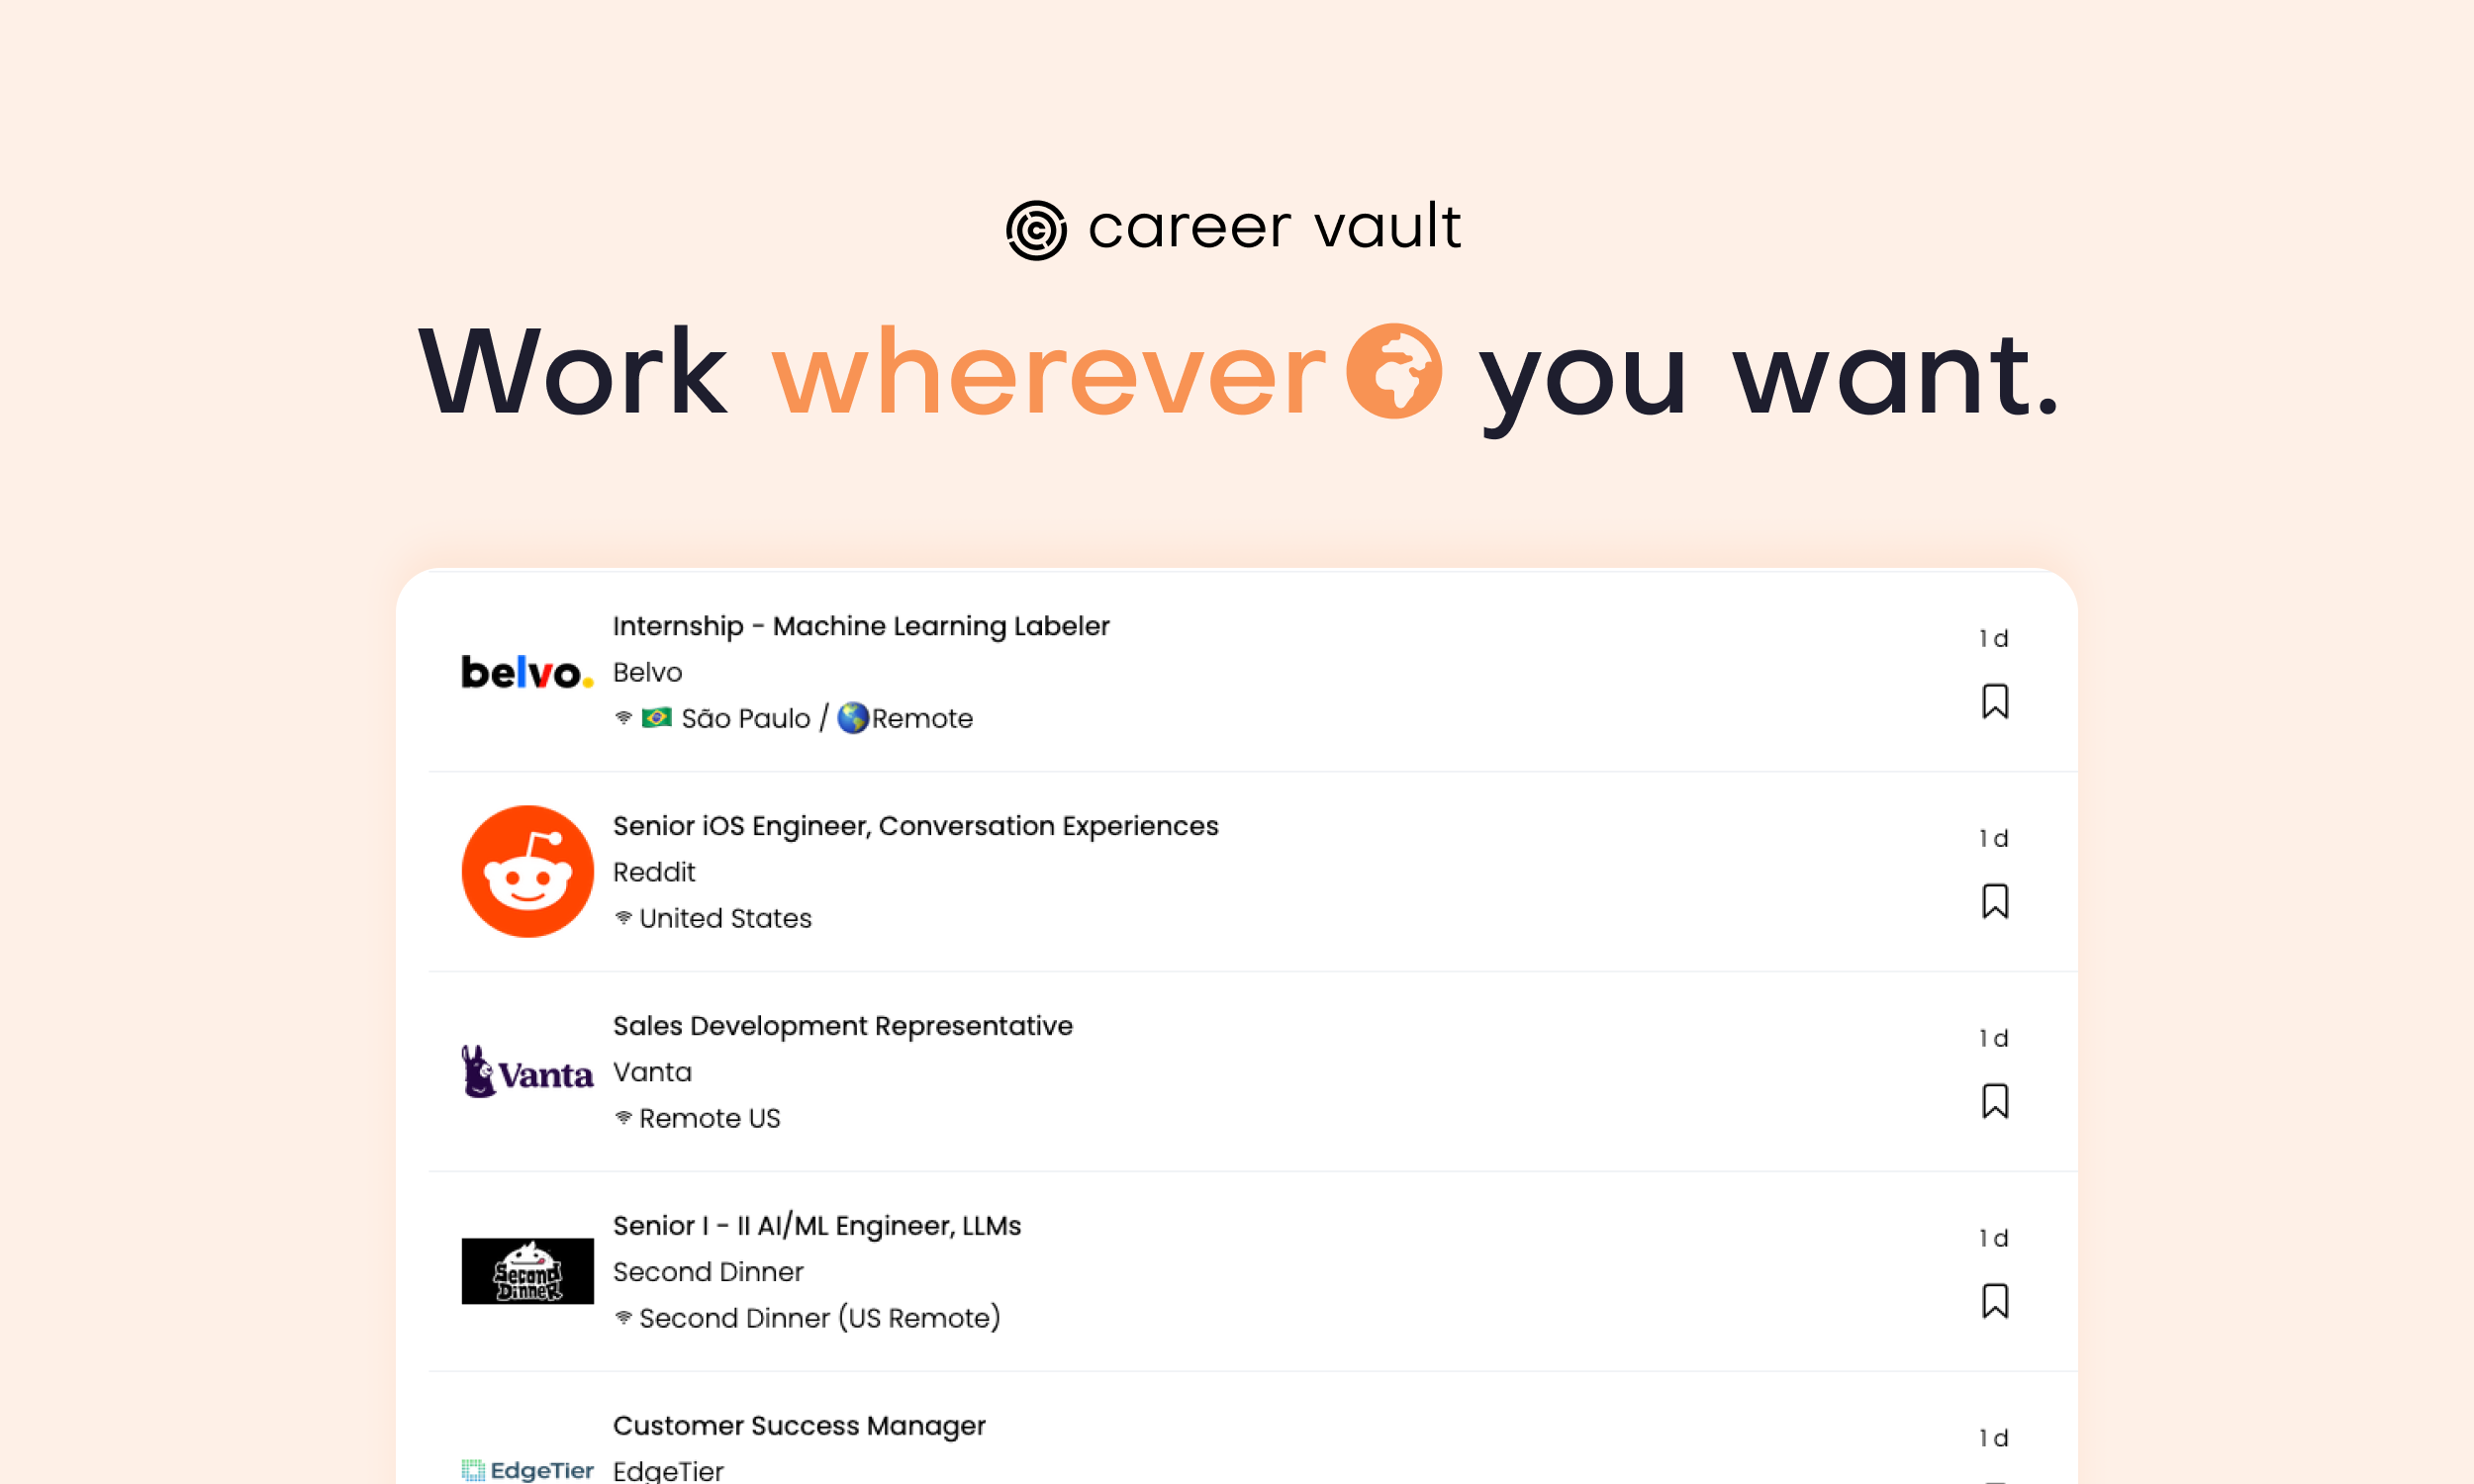 career-vault - Find a remote job that fits your lifestyle